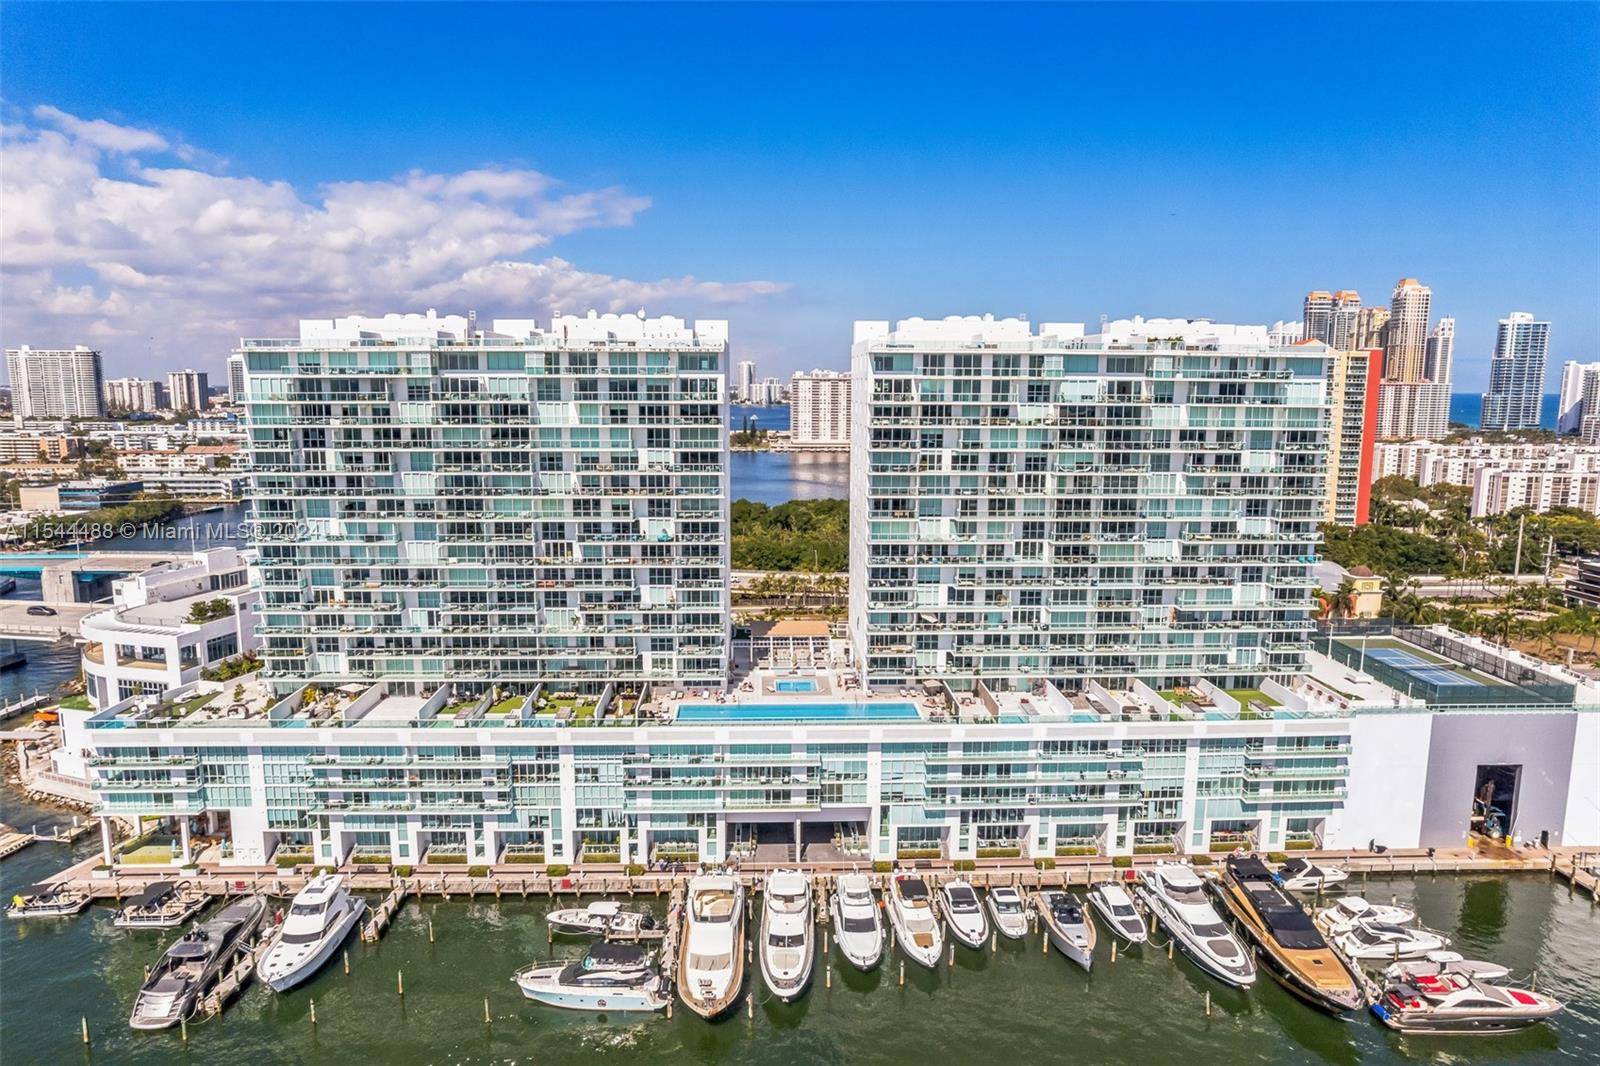 Experience waterfront luxury living at its finest in this exquisite 2 Bed Den 3 Bath two story unit located in the prestigious 400 Sunny Isles community.